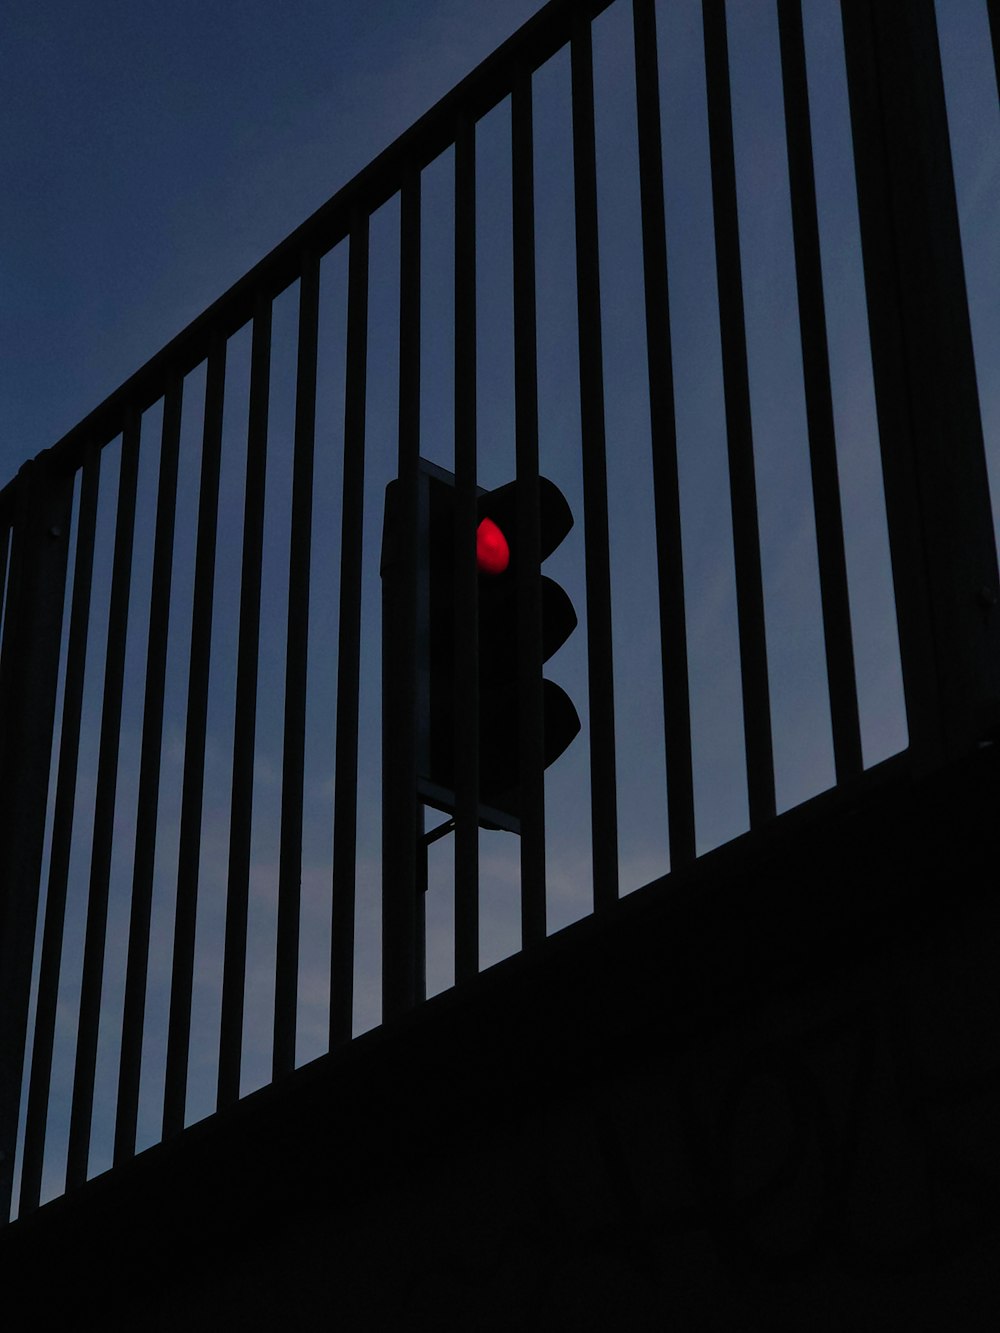 a traffic light on a metal fence with a blue sky in the background